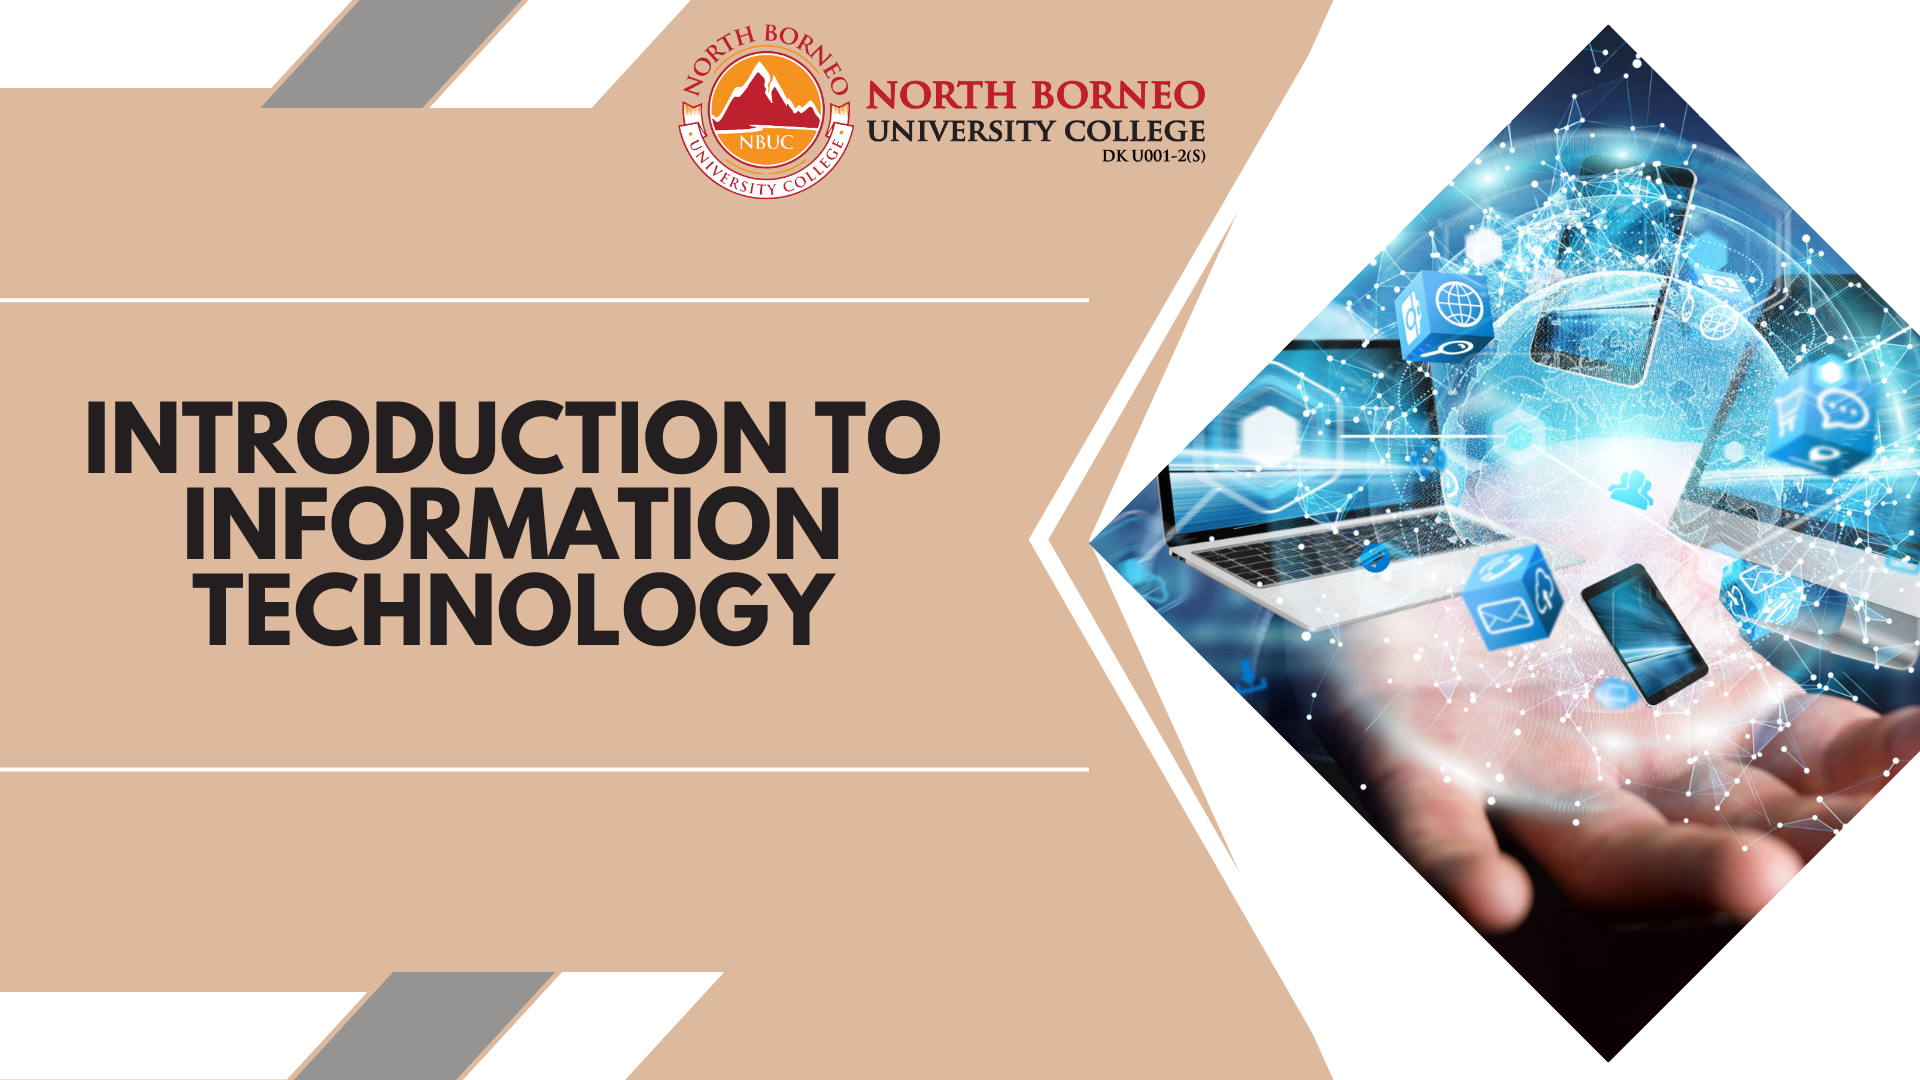 Introduction to Information Technology (BBA IB ODL)